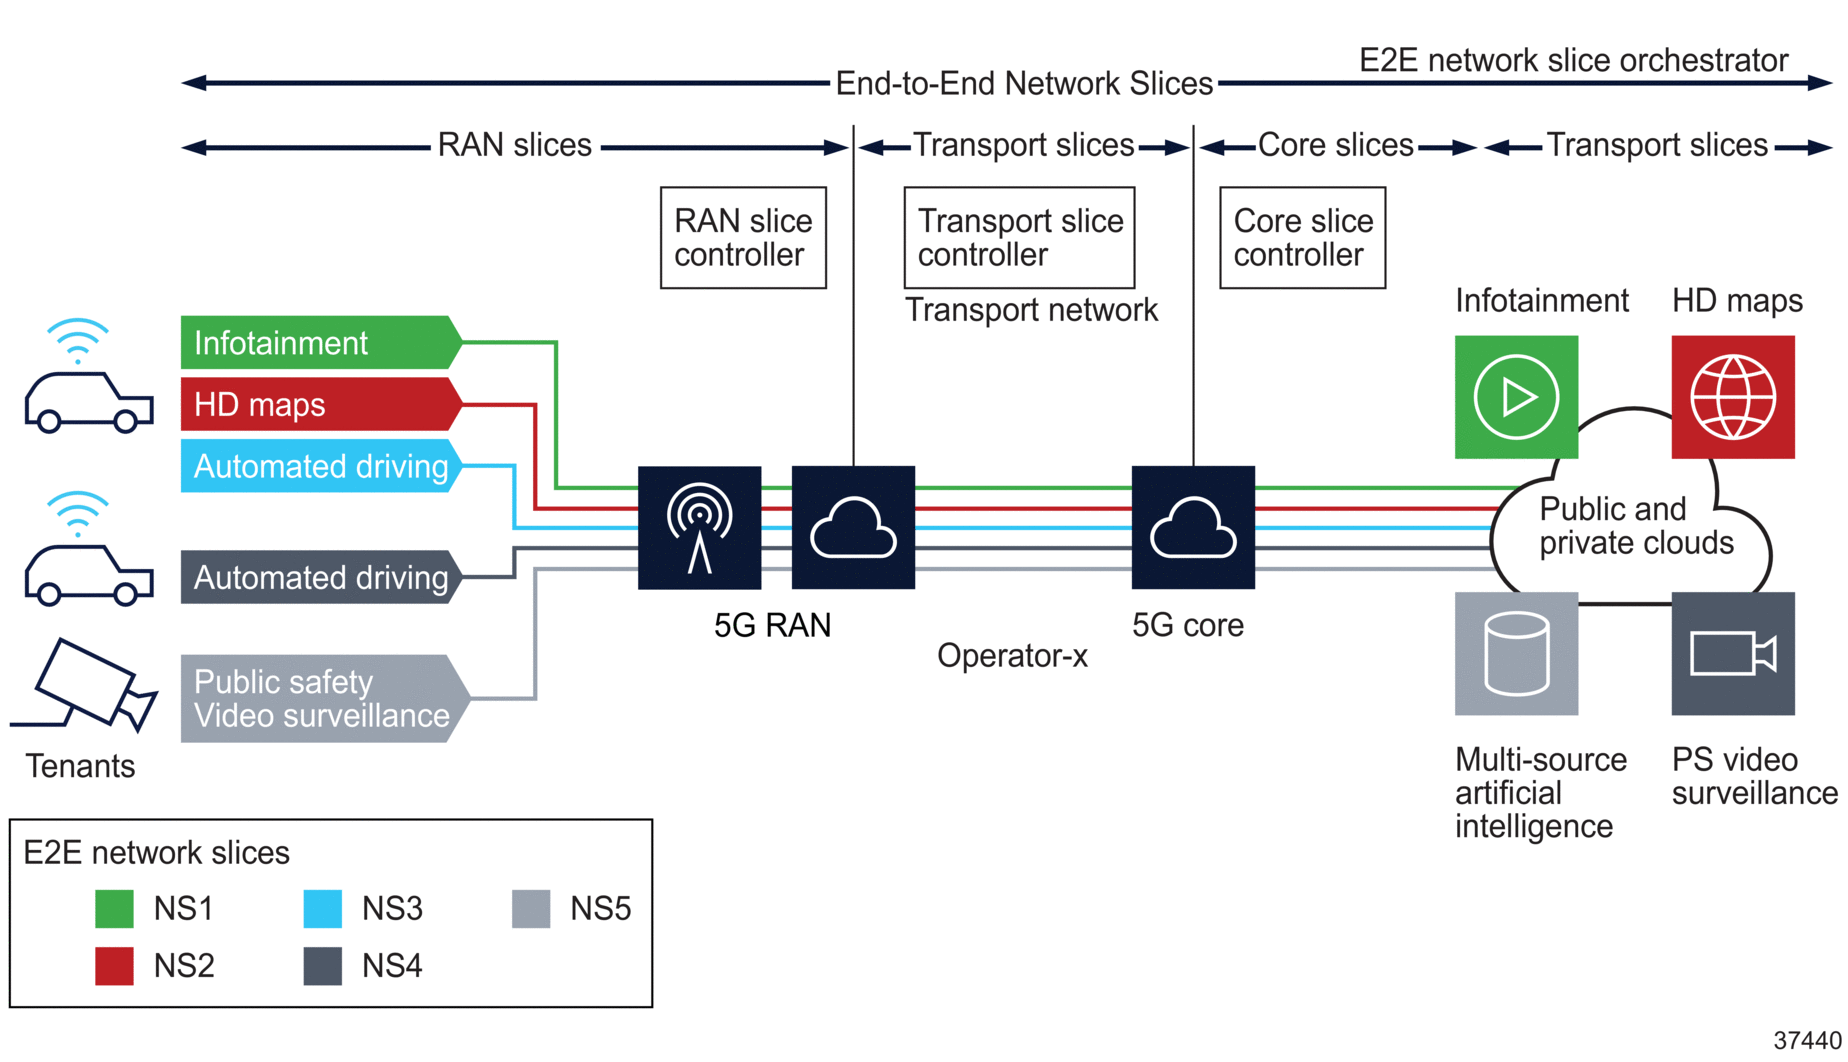 Typical end-to-end network slice from Operator-X perspective